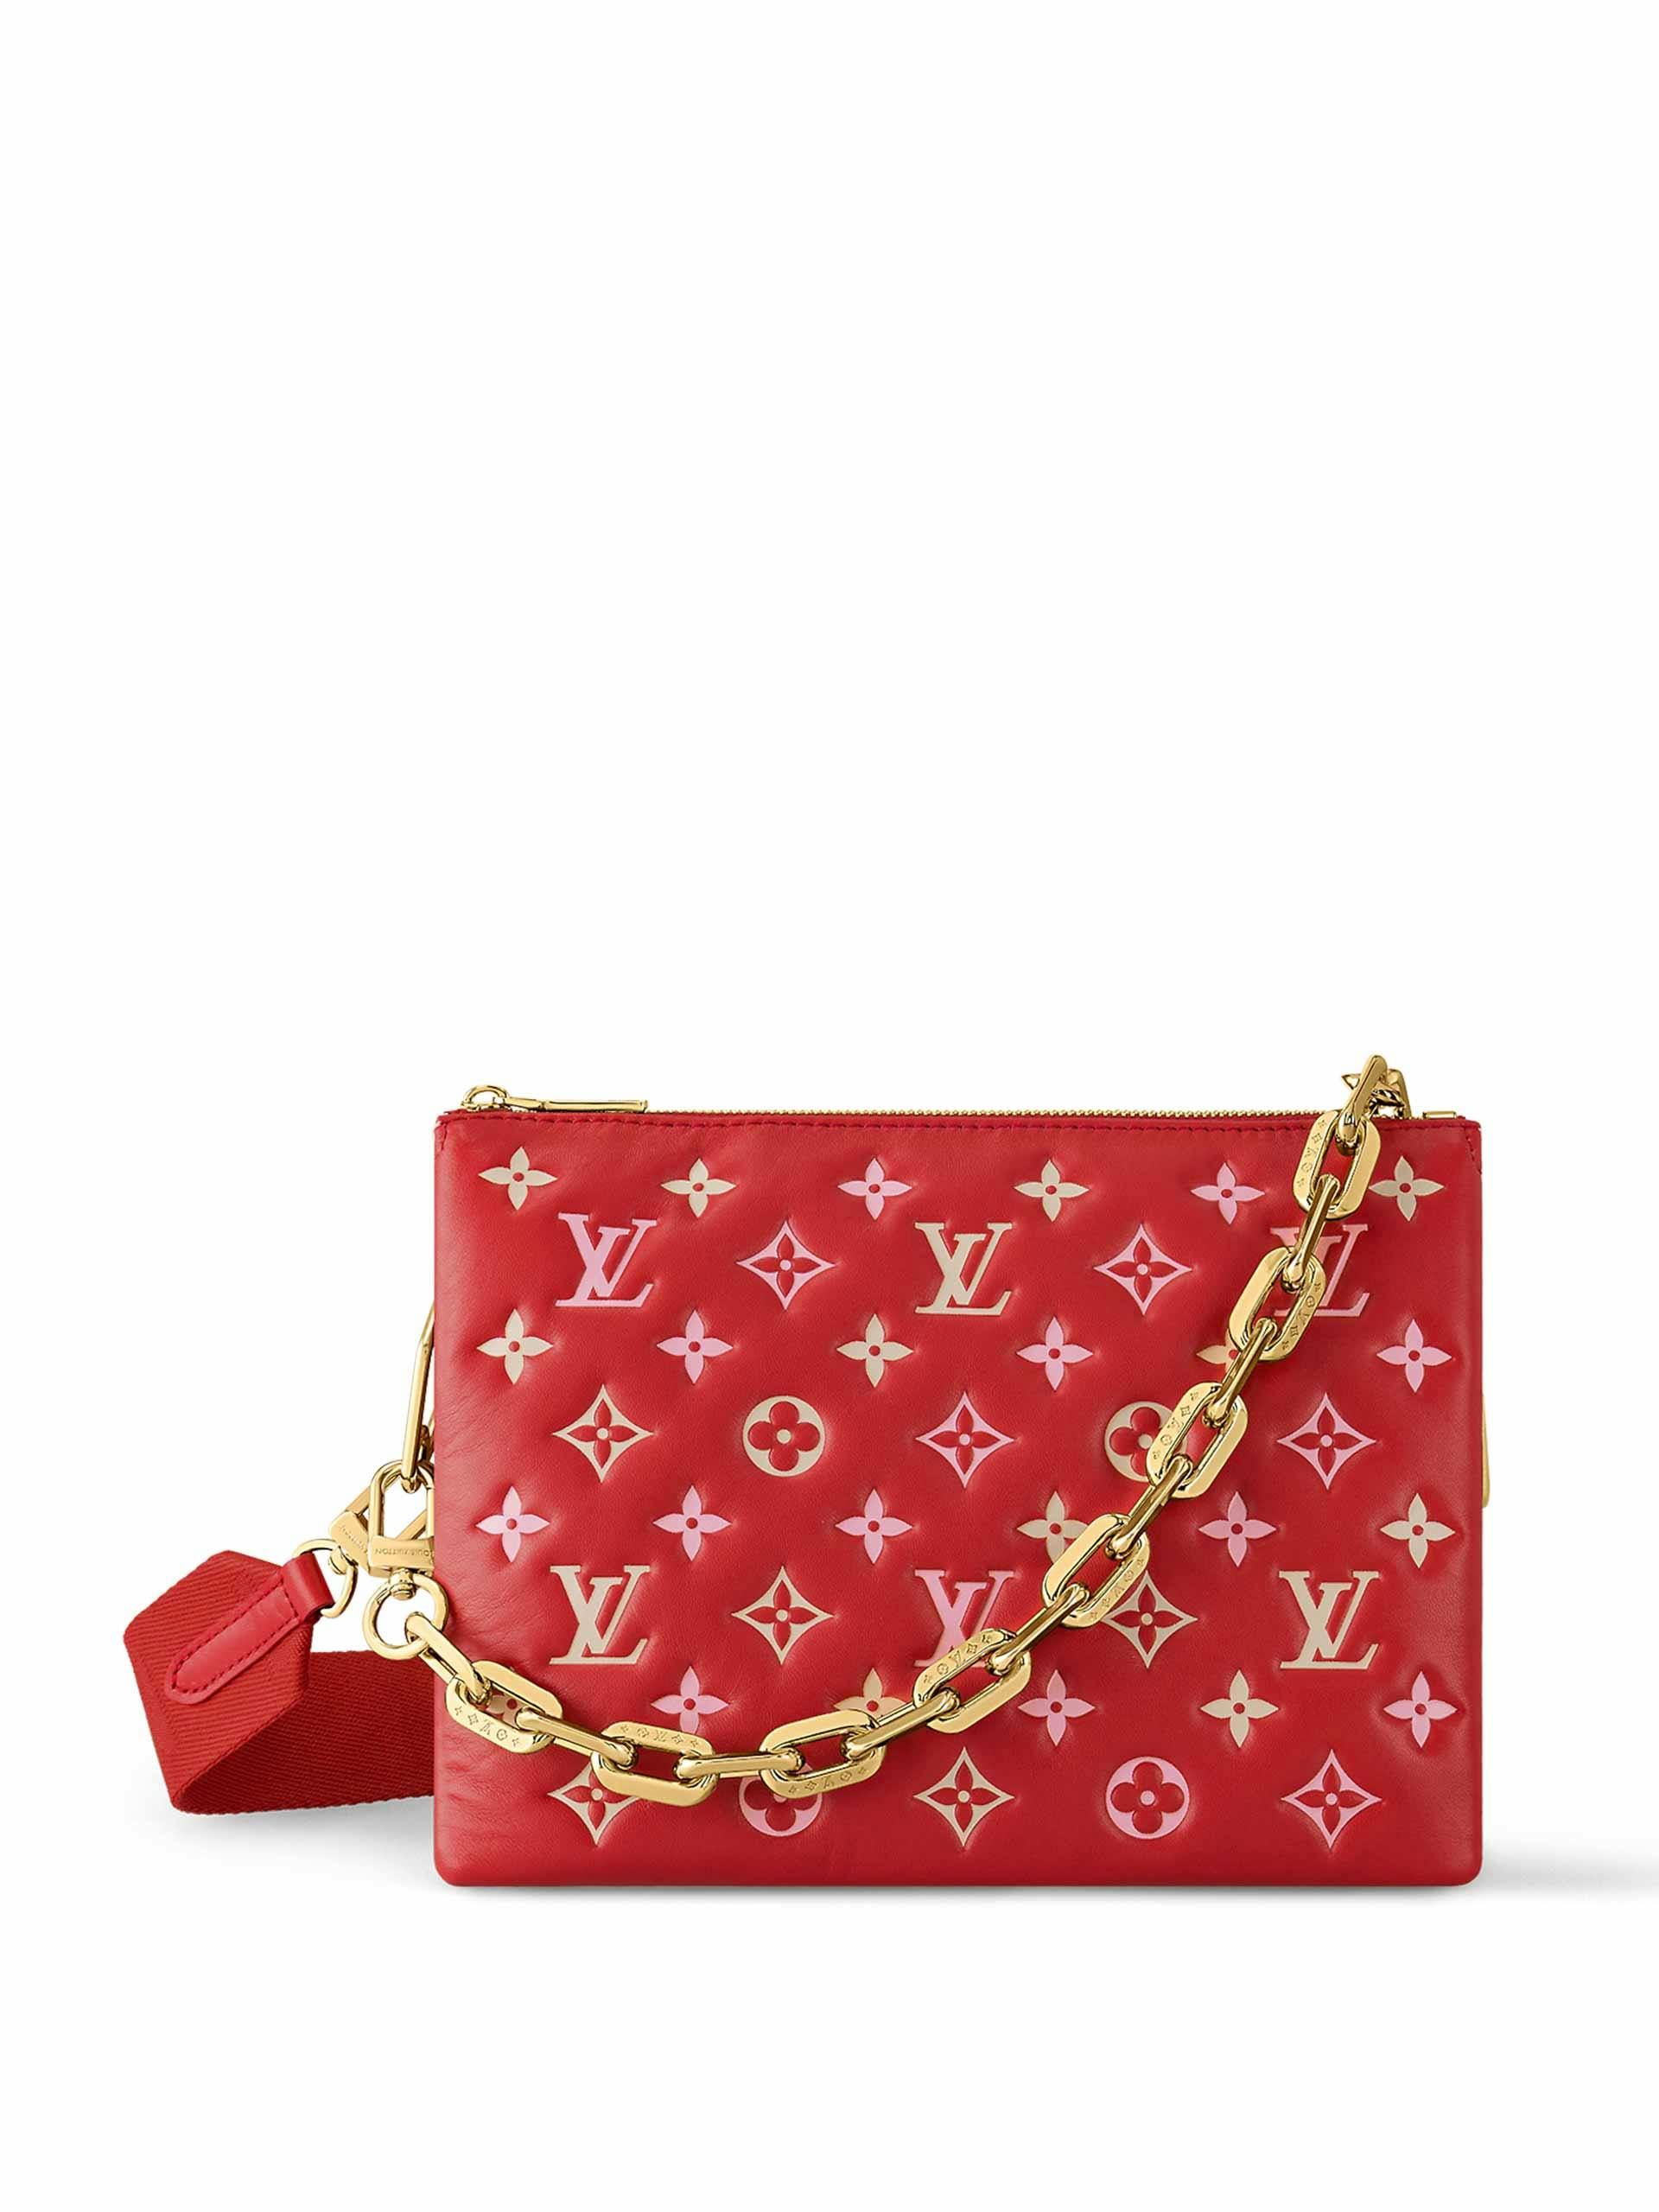 Embossed leather bag with gold chain